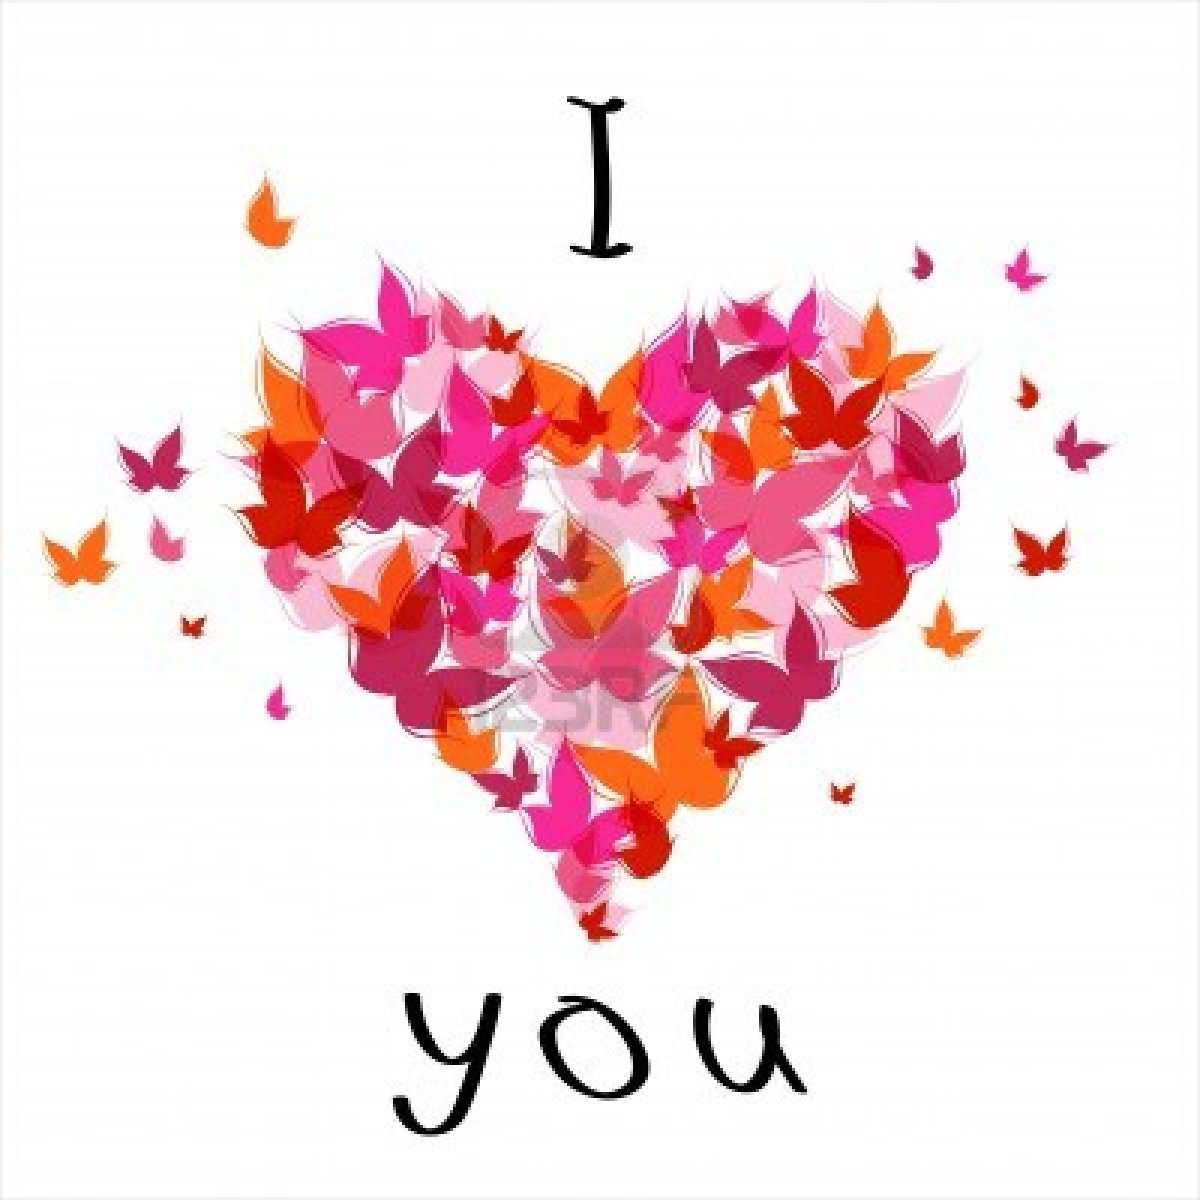 I Love You Heart Of Butterflies Animated Graphic